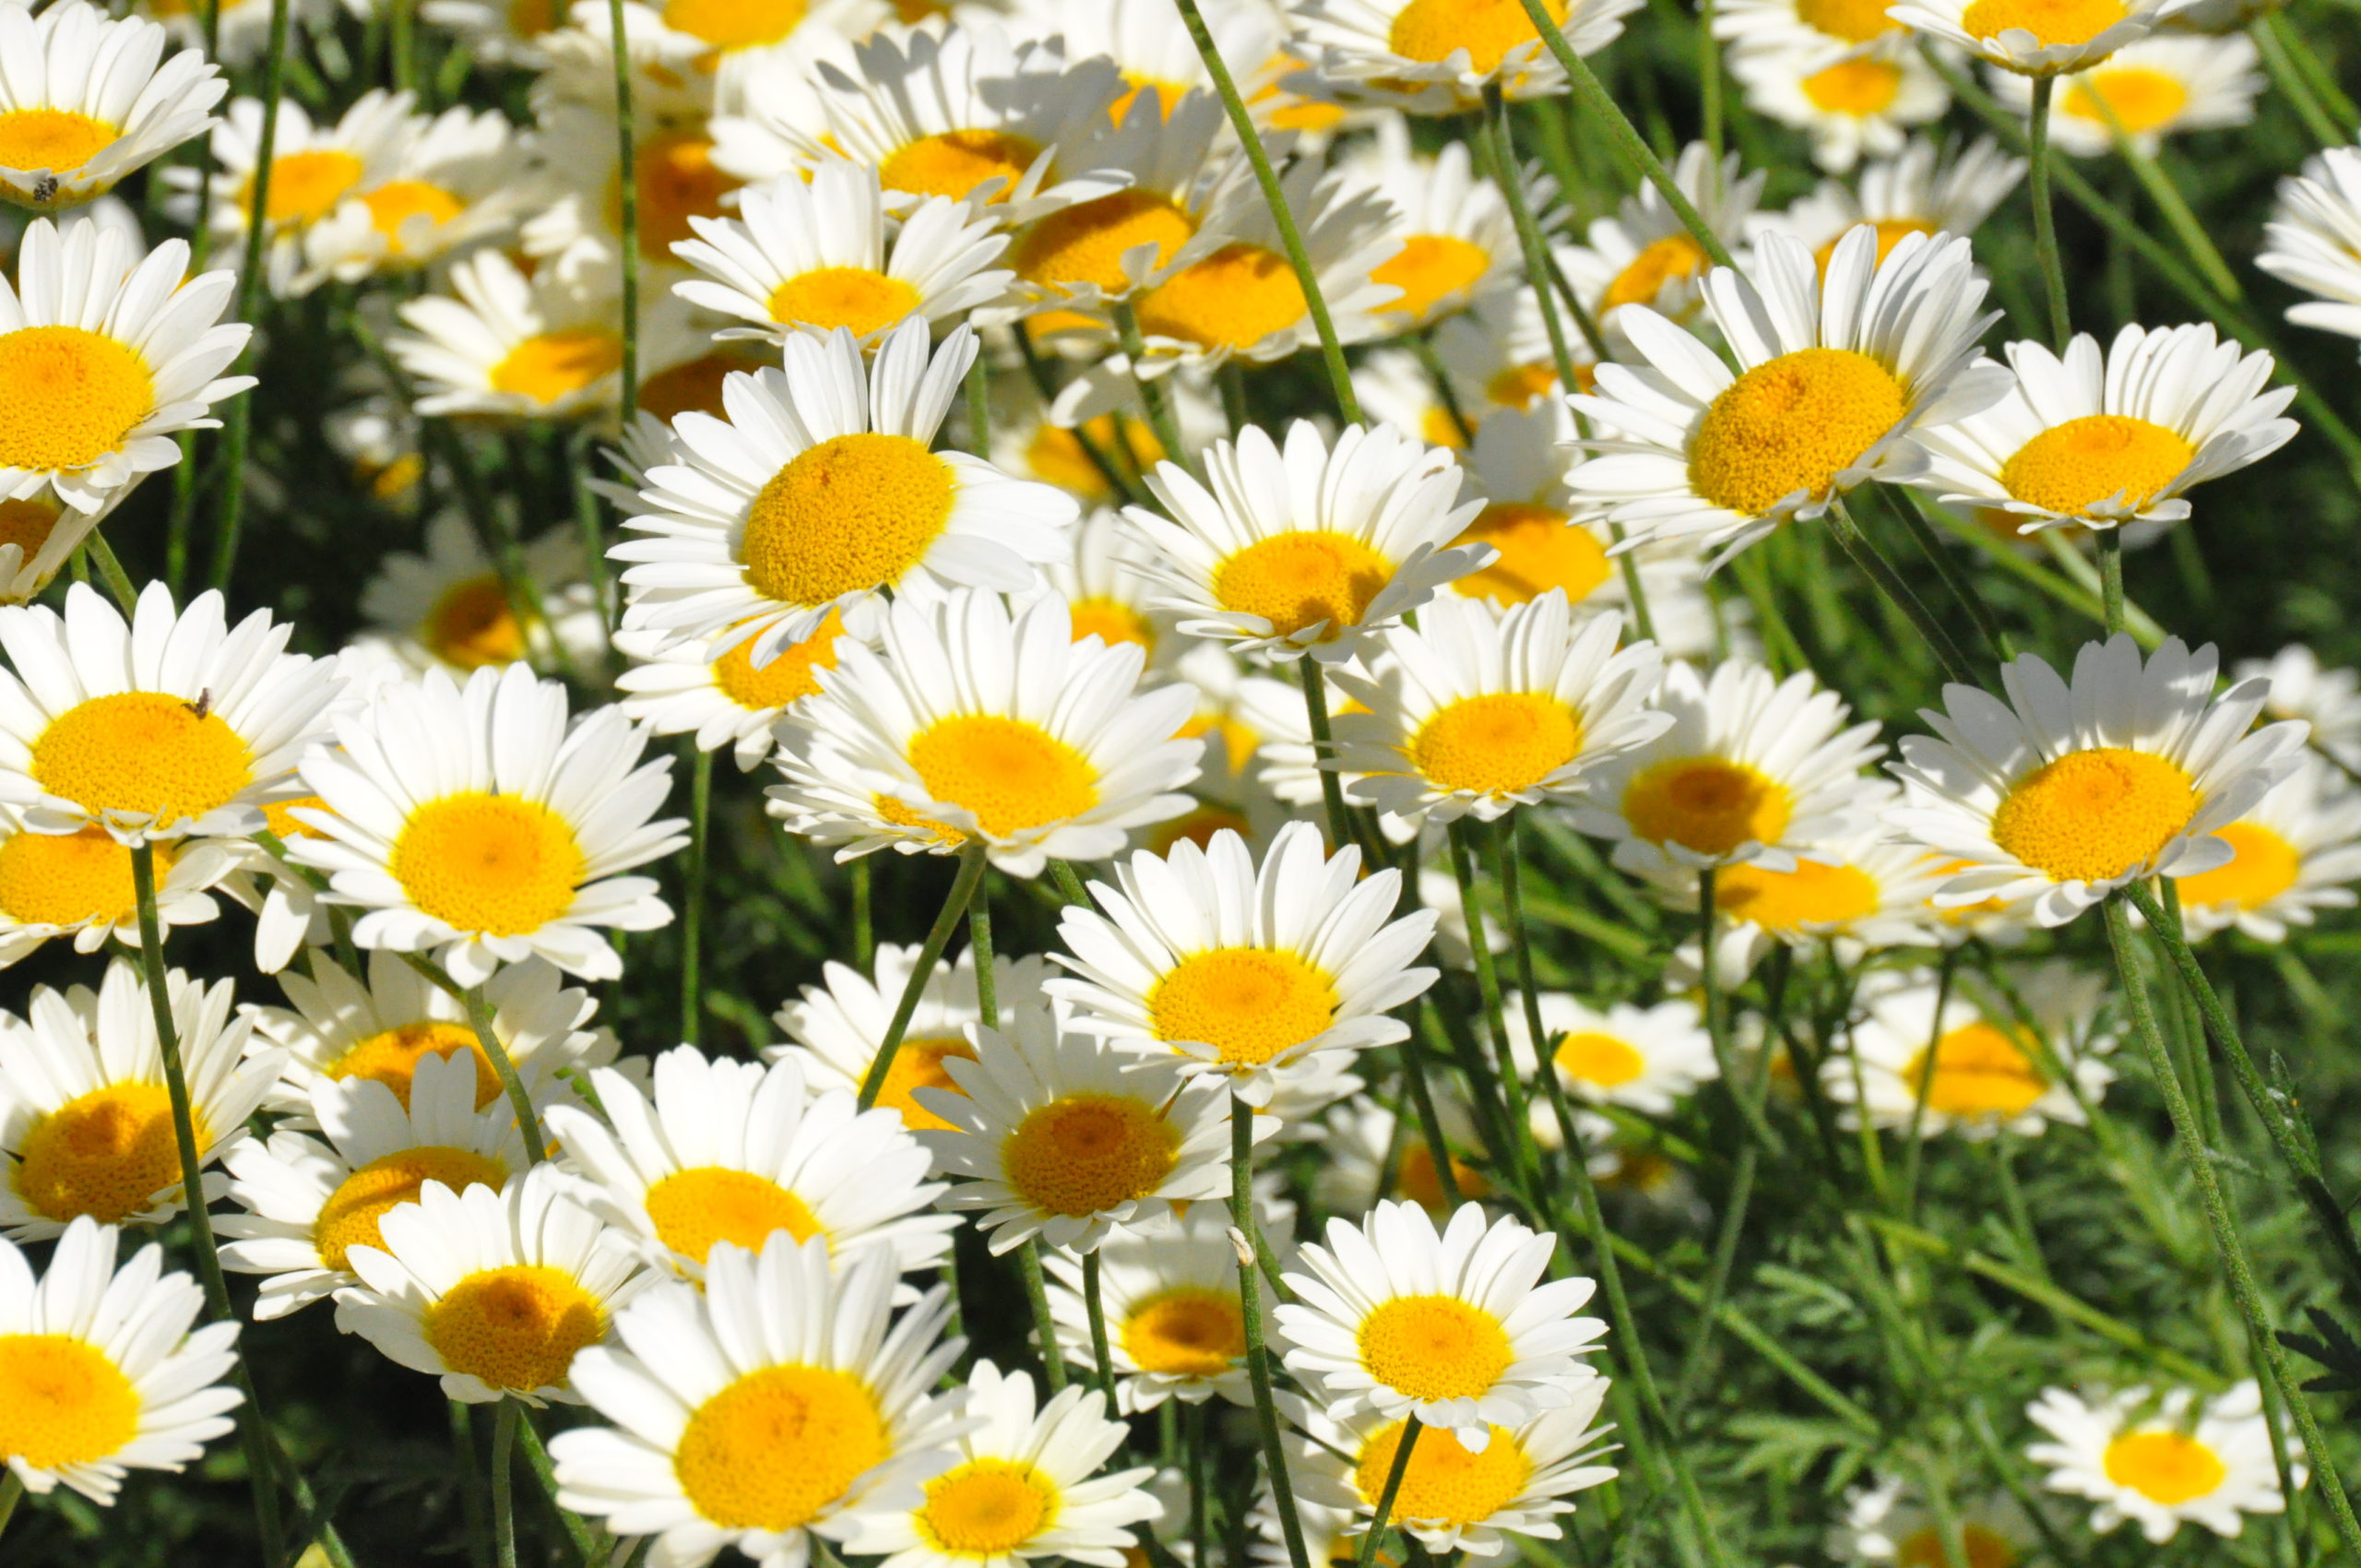 A field of daisies